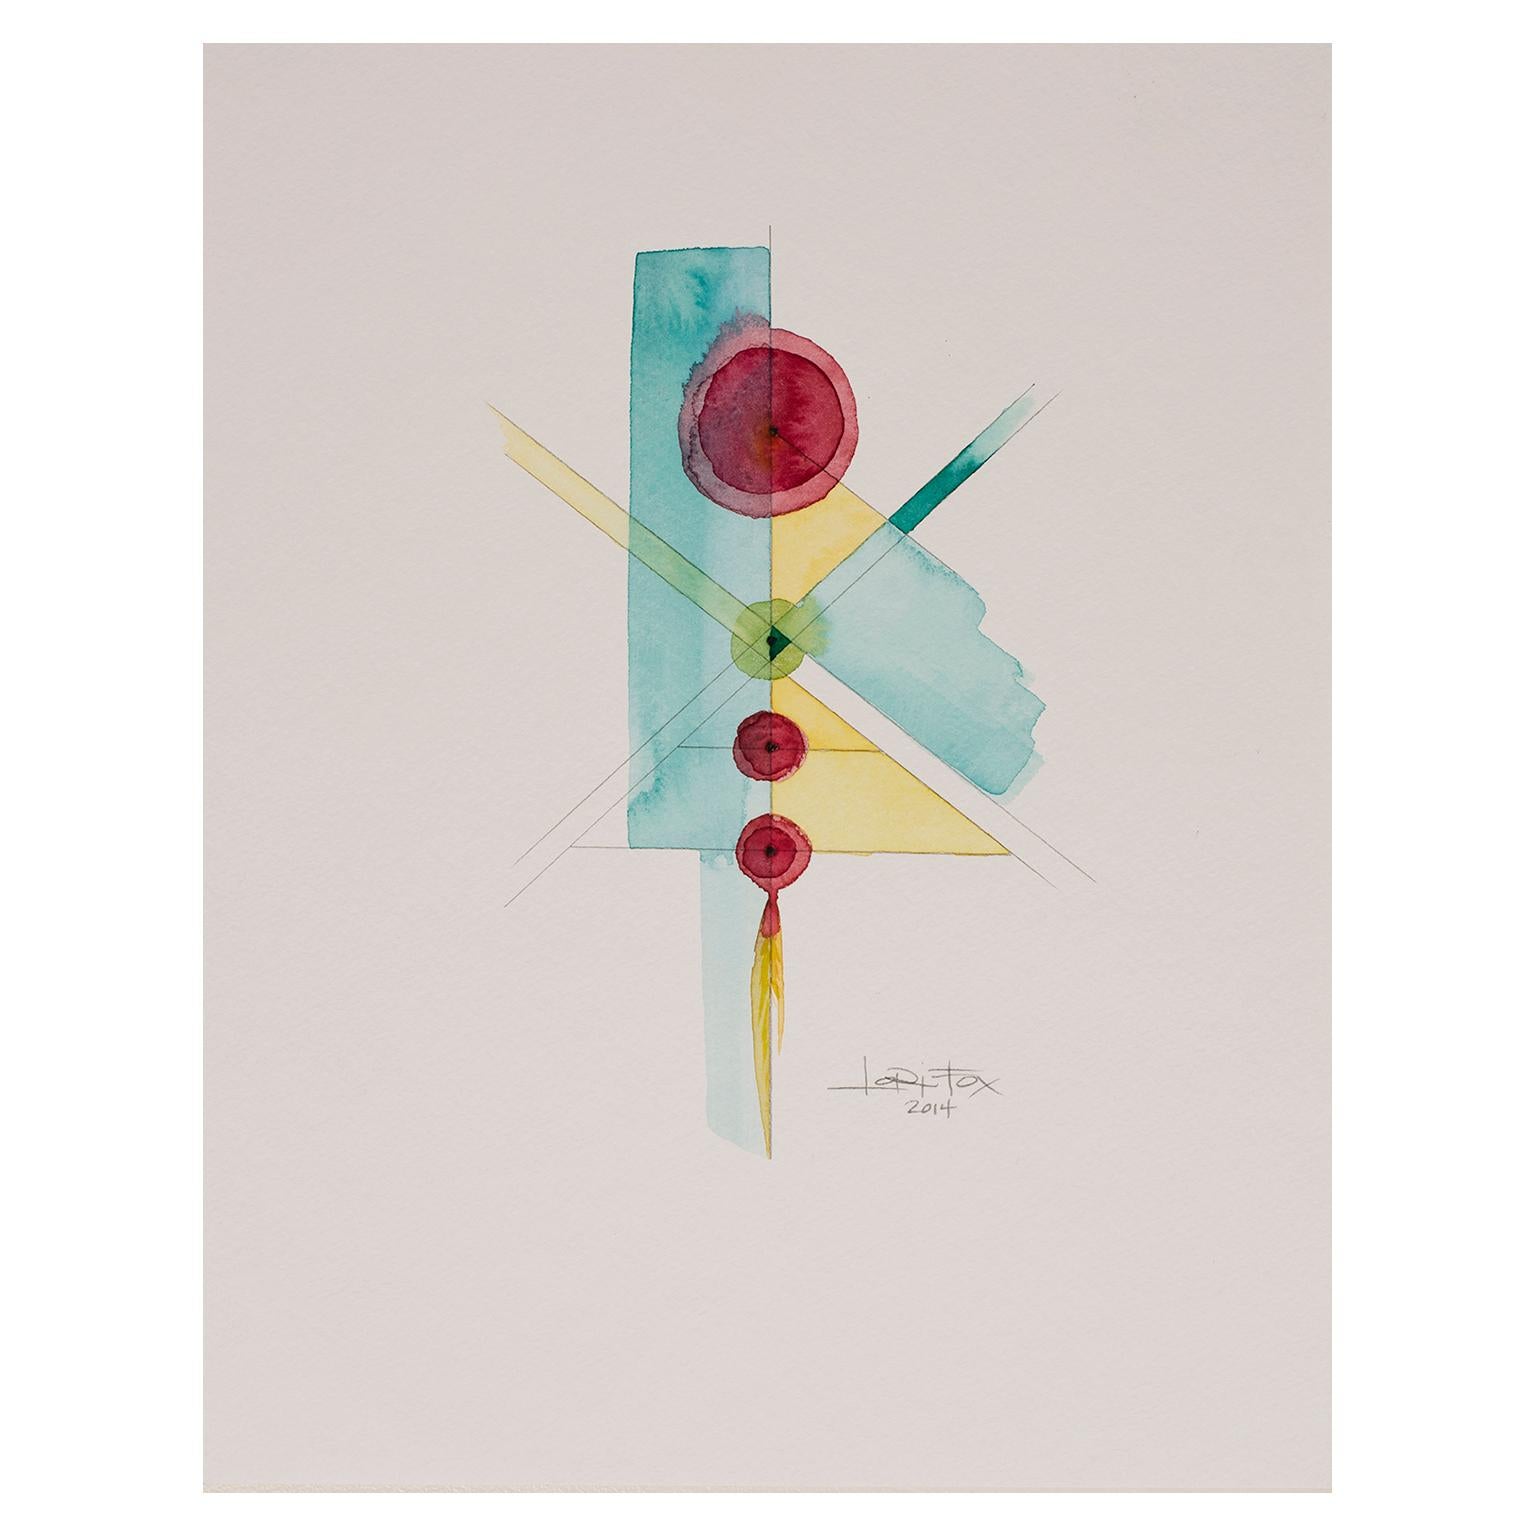 Totem 2.003 by Lori Fox. Abstract light blue, red, yellow and green watercolour im Angebot 1